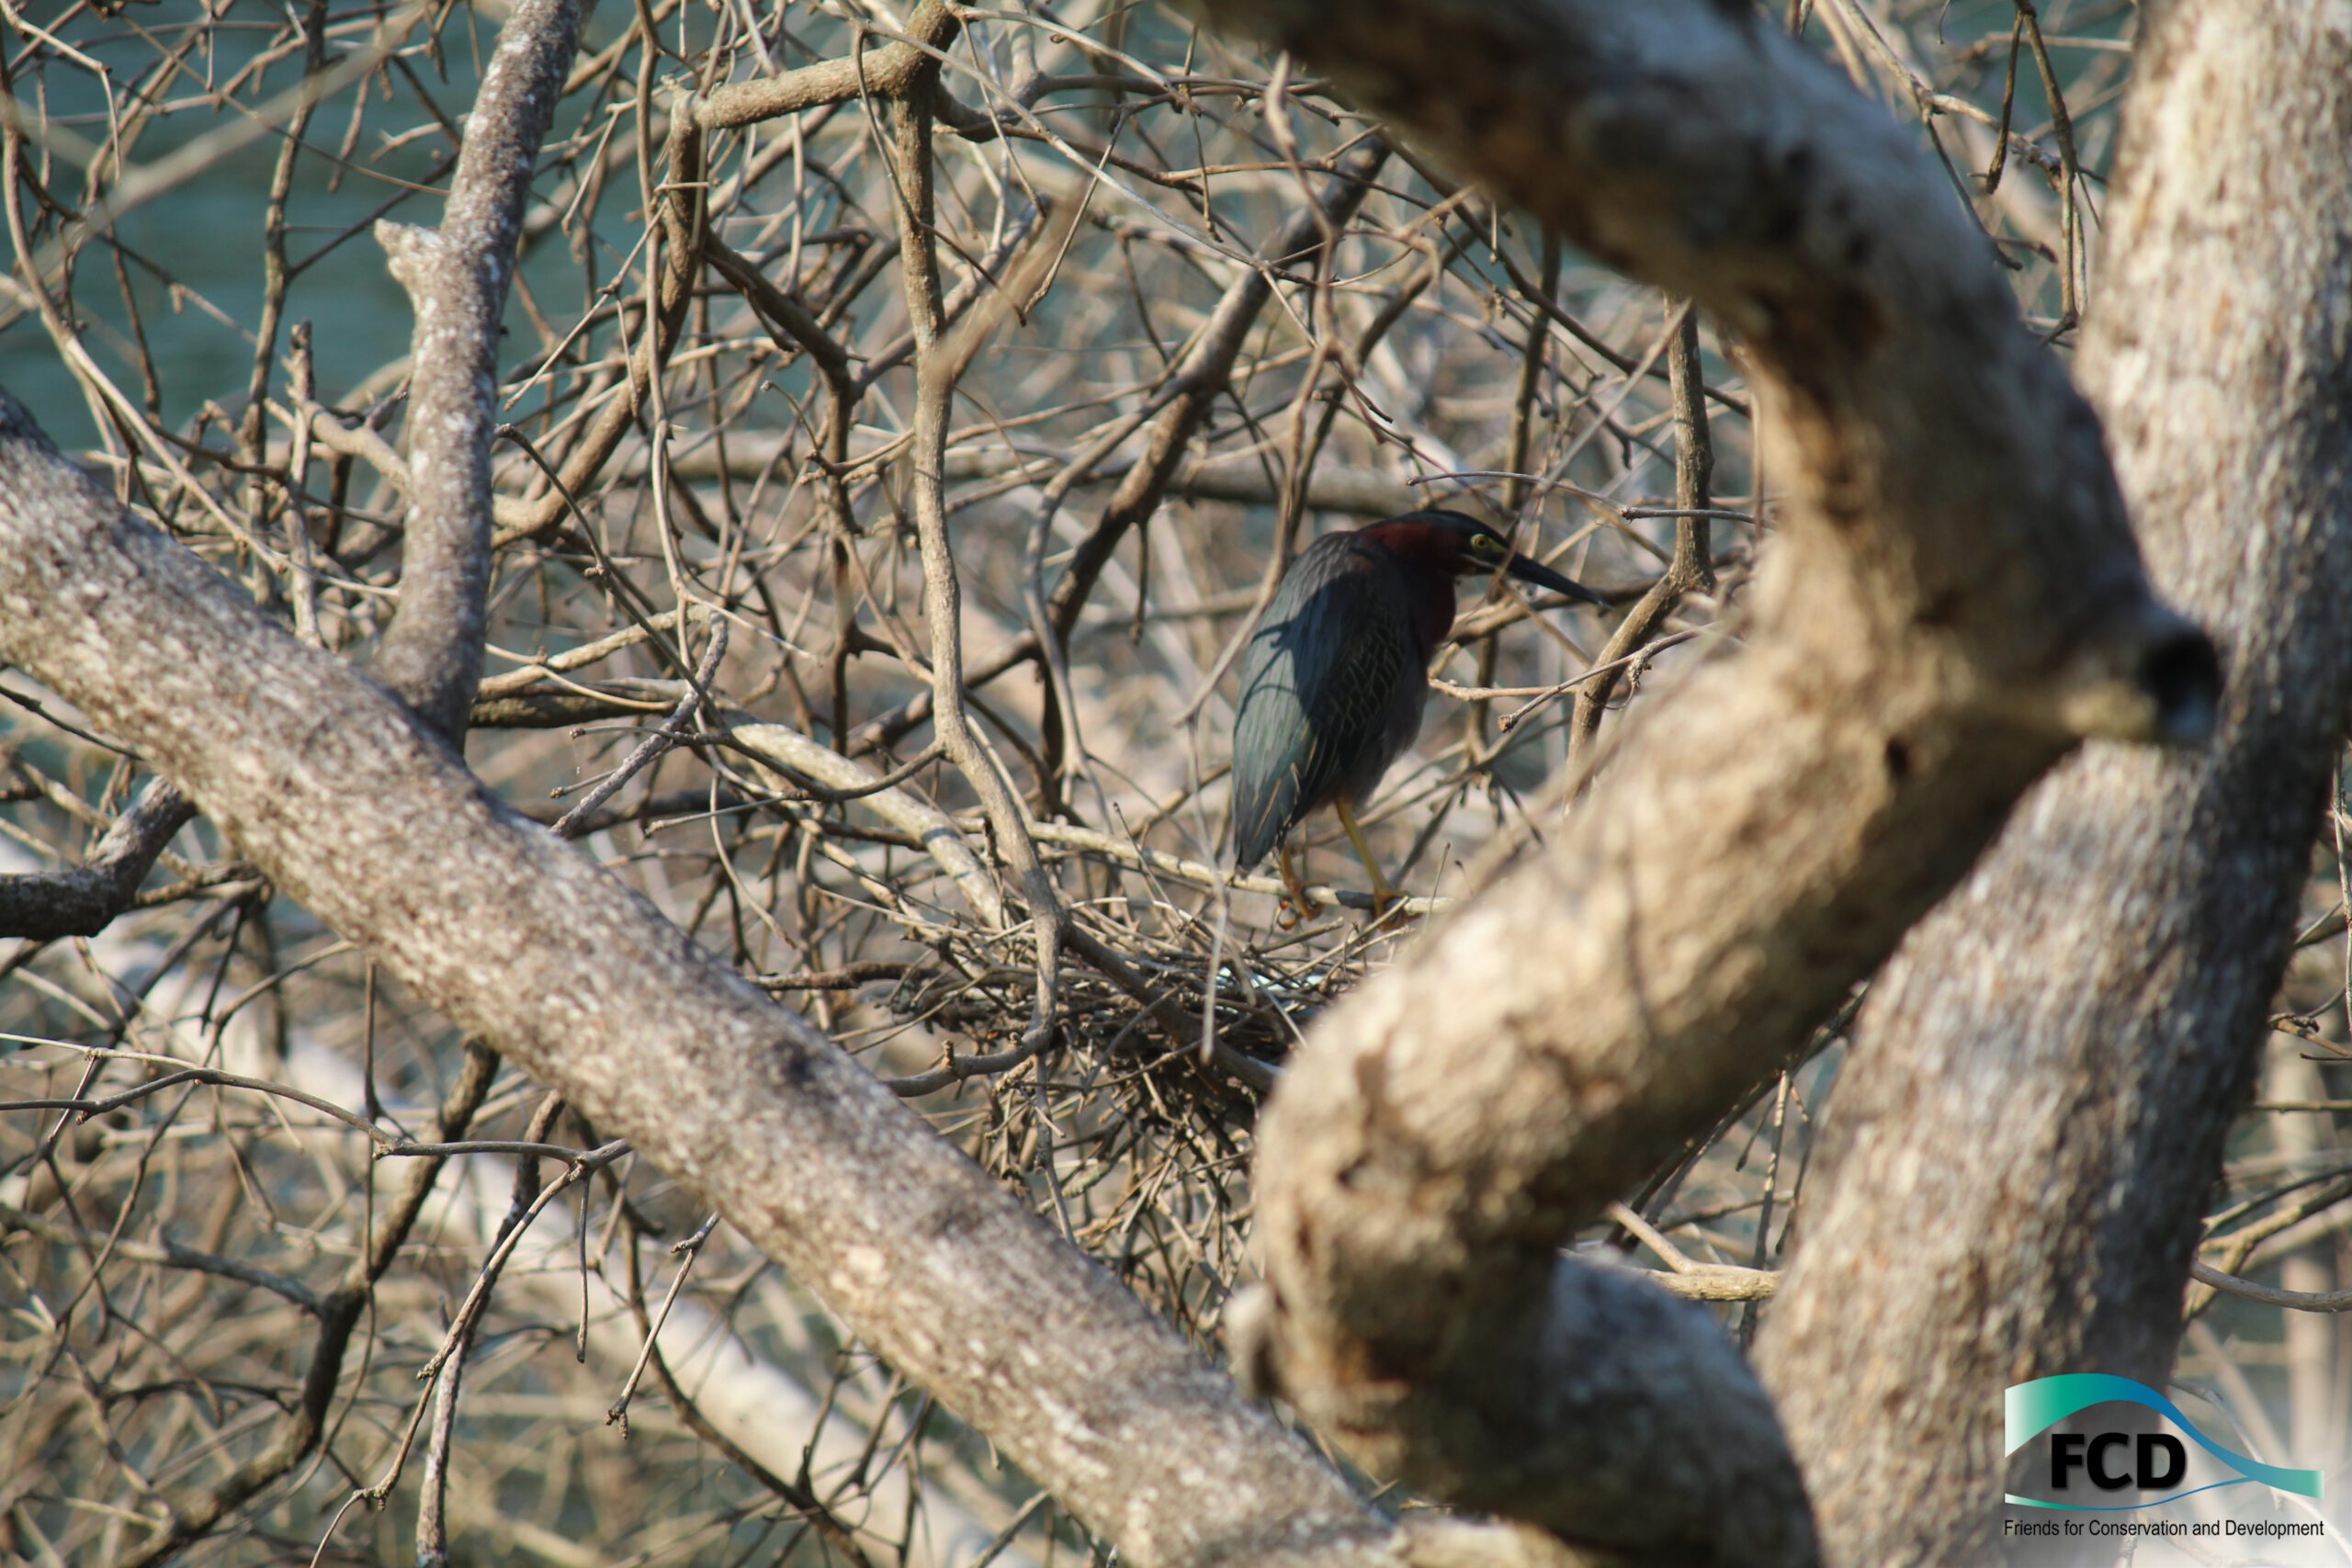 It’s Wild Wonder Wednesday! Can you spot the Green Heron?